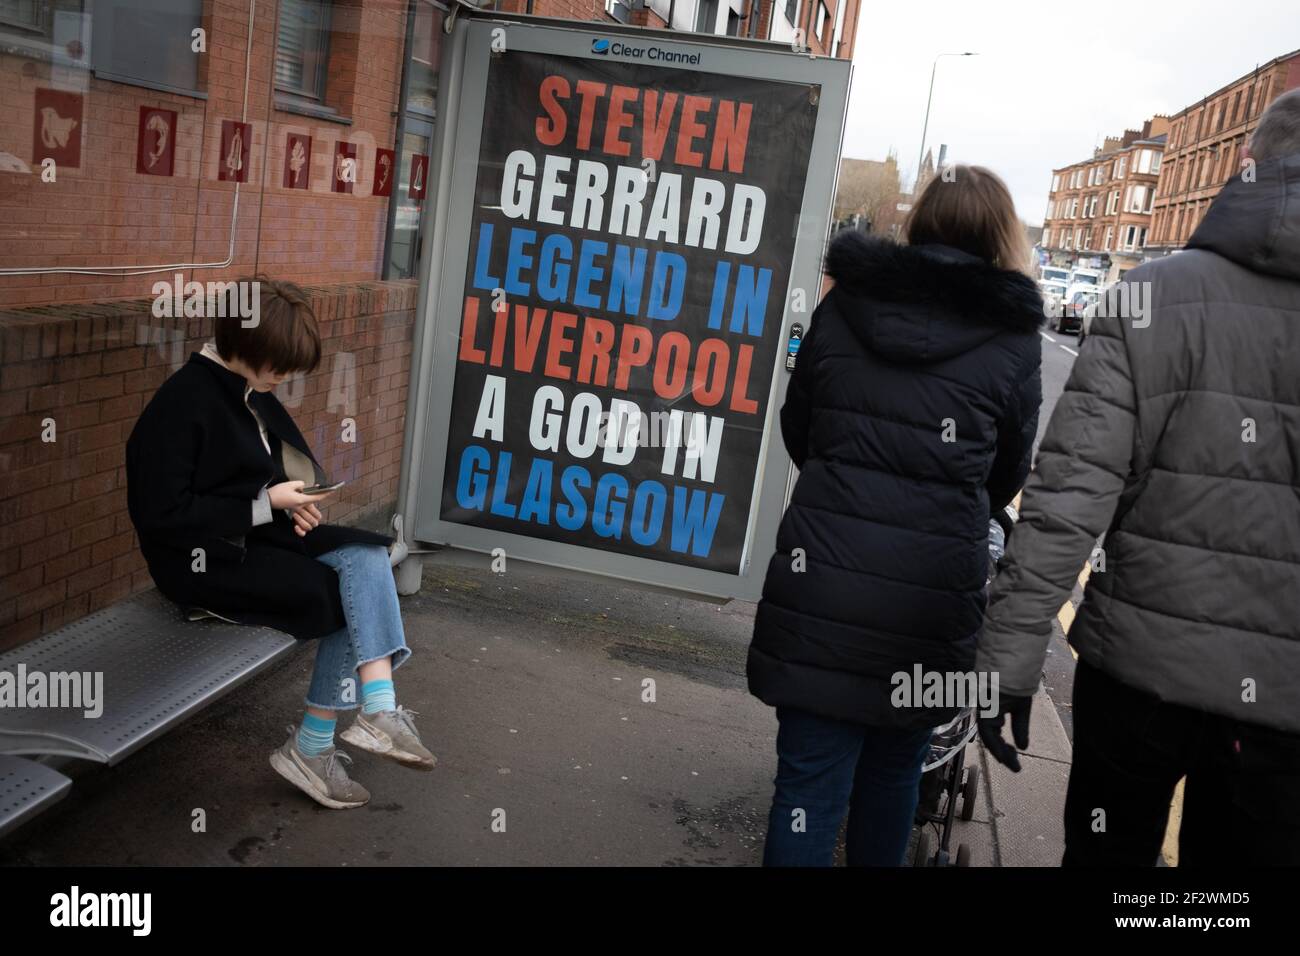 Glasgow, UK, on 13 March 2021. Posters celebrating last weekend’s Scottish Premiership title win by Rangers Football Club, their 55th such title, and proclaiming their manager, Steven Gerrard, a ‘God’, have appeared on bus shelters in the city’s Southside. It would appear the poster campaign is a guerrilla campaign, with unauthorised use of the advertising spaces. Photo credit: Jeremy Sutton-Hibbert/Alamy Live News. Stock Photo